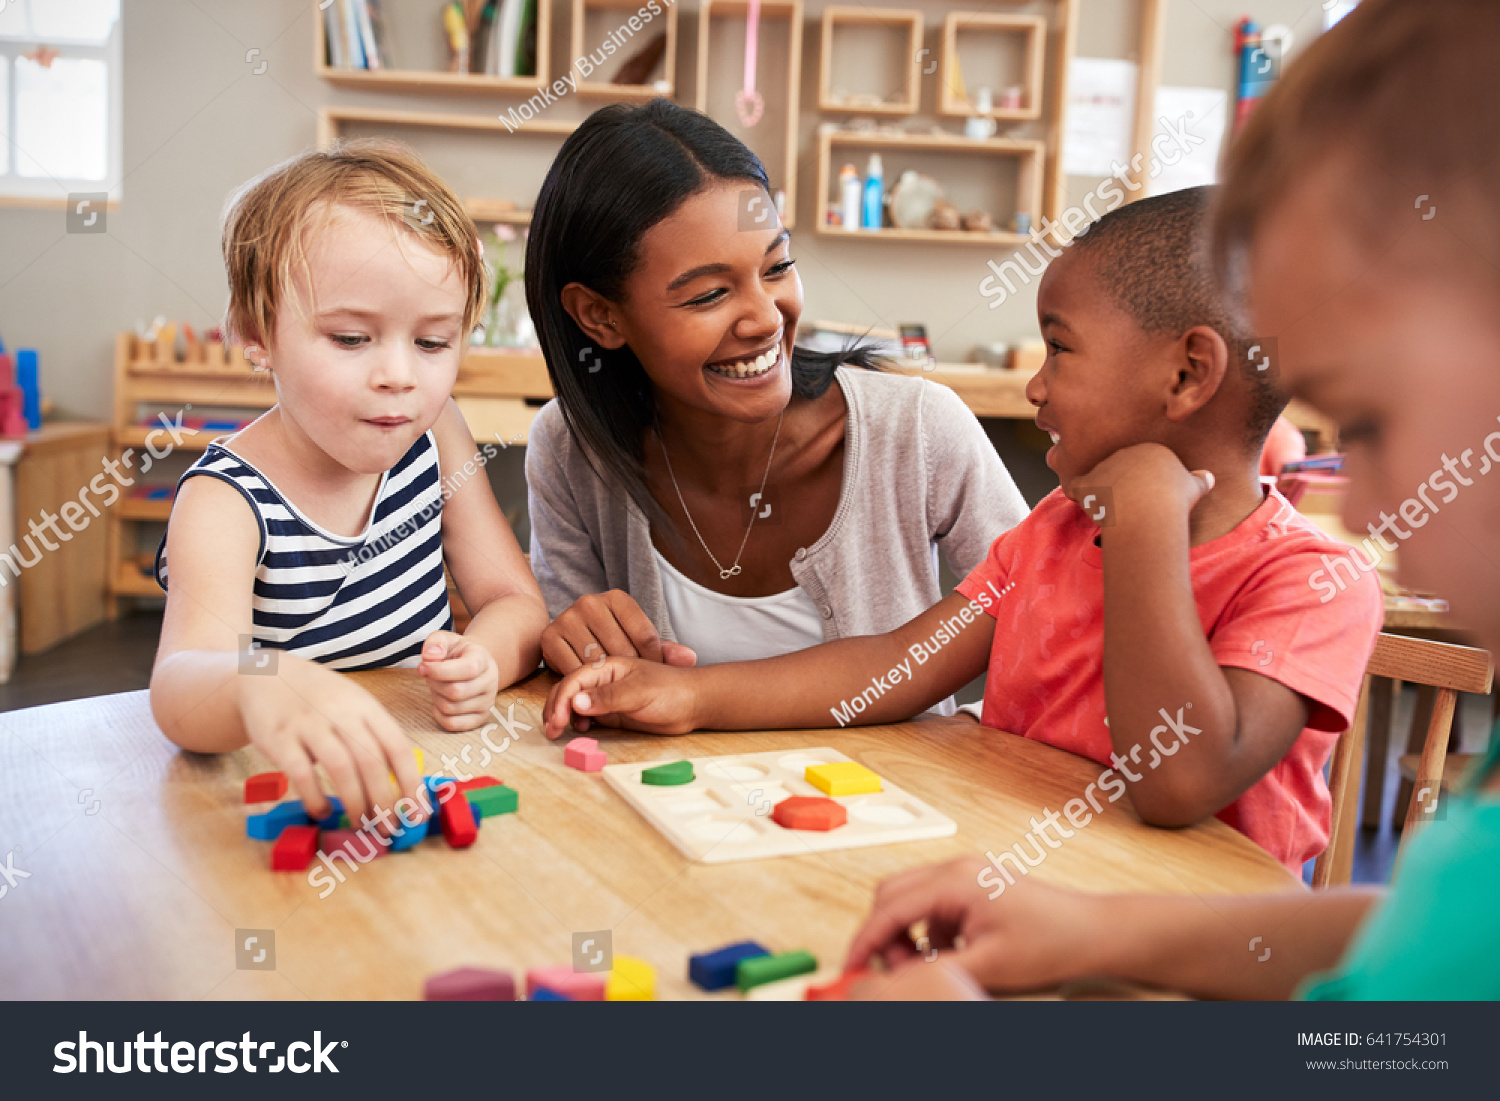 Teacher And Pupils Using Wooden Shapes In Montessori School #641754301